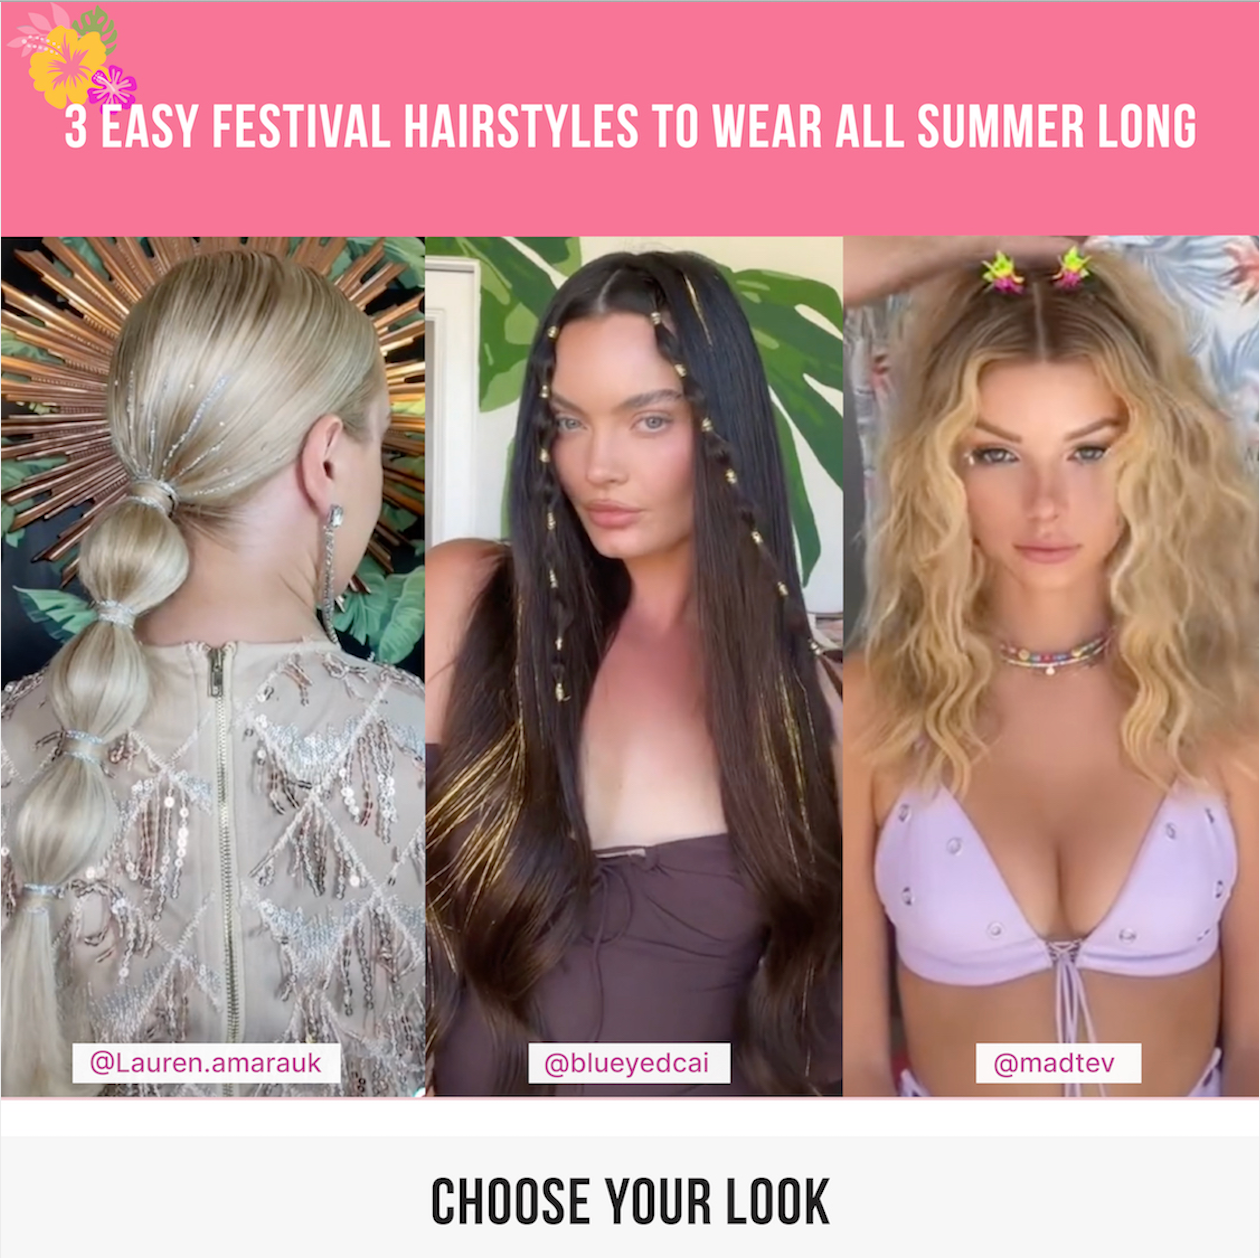 Simple steps for festival braids with unite